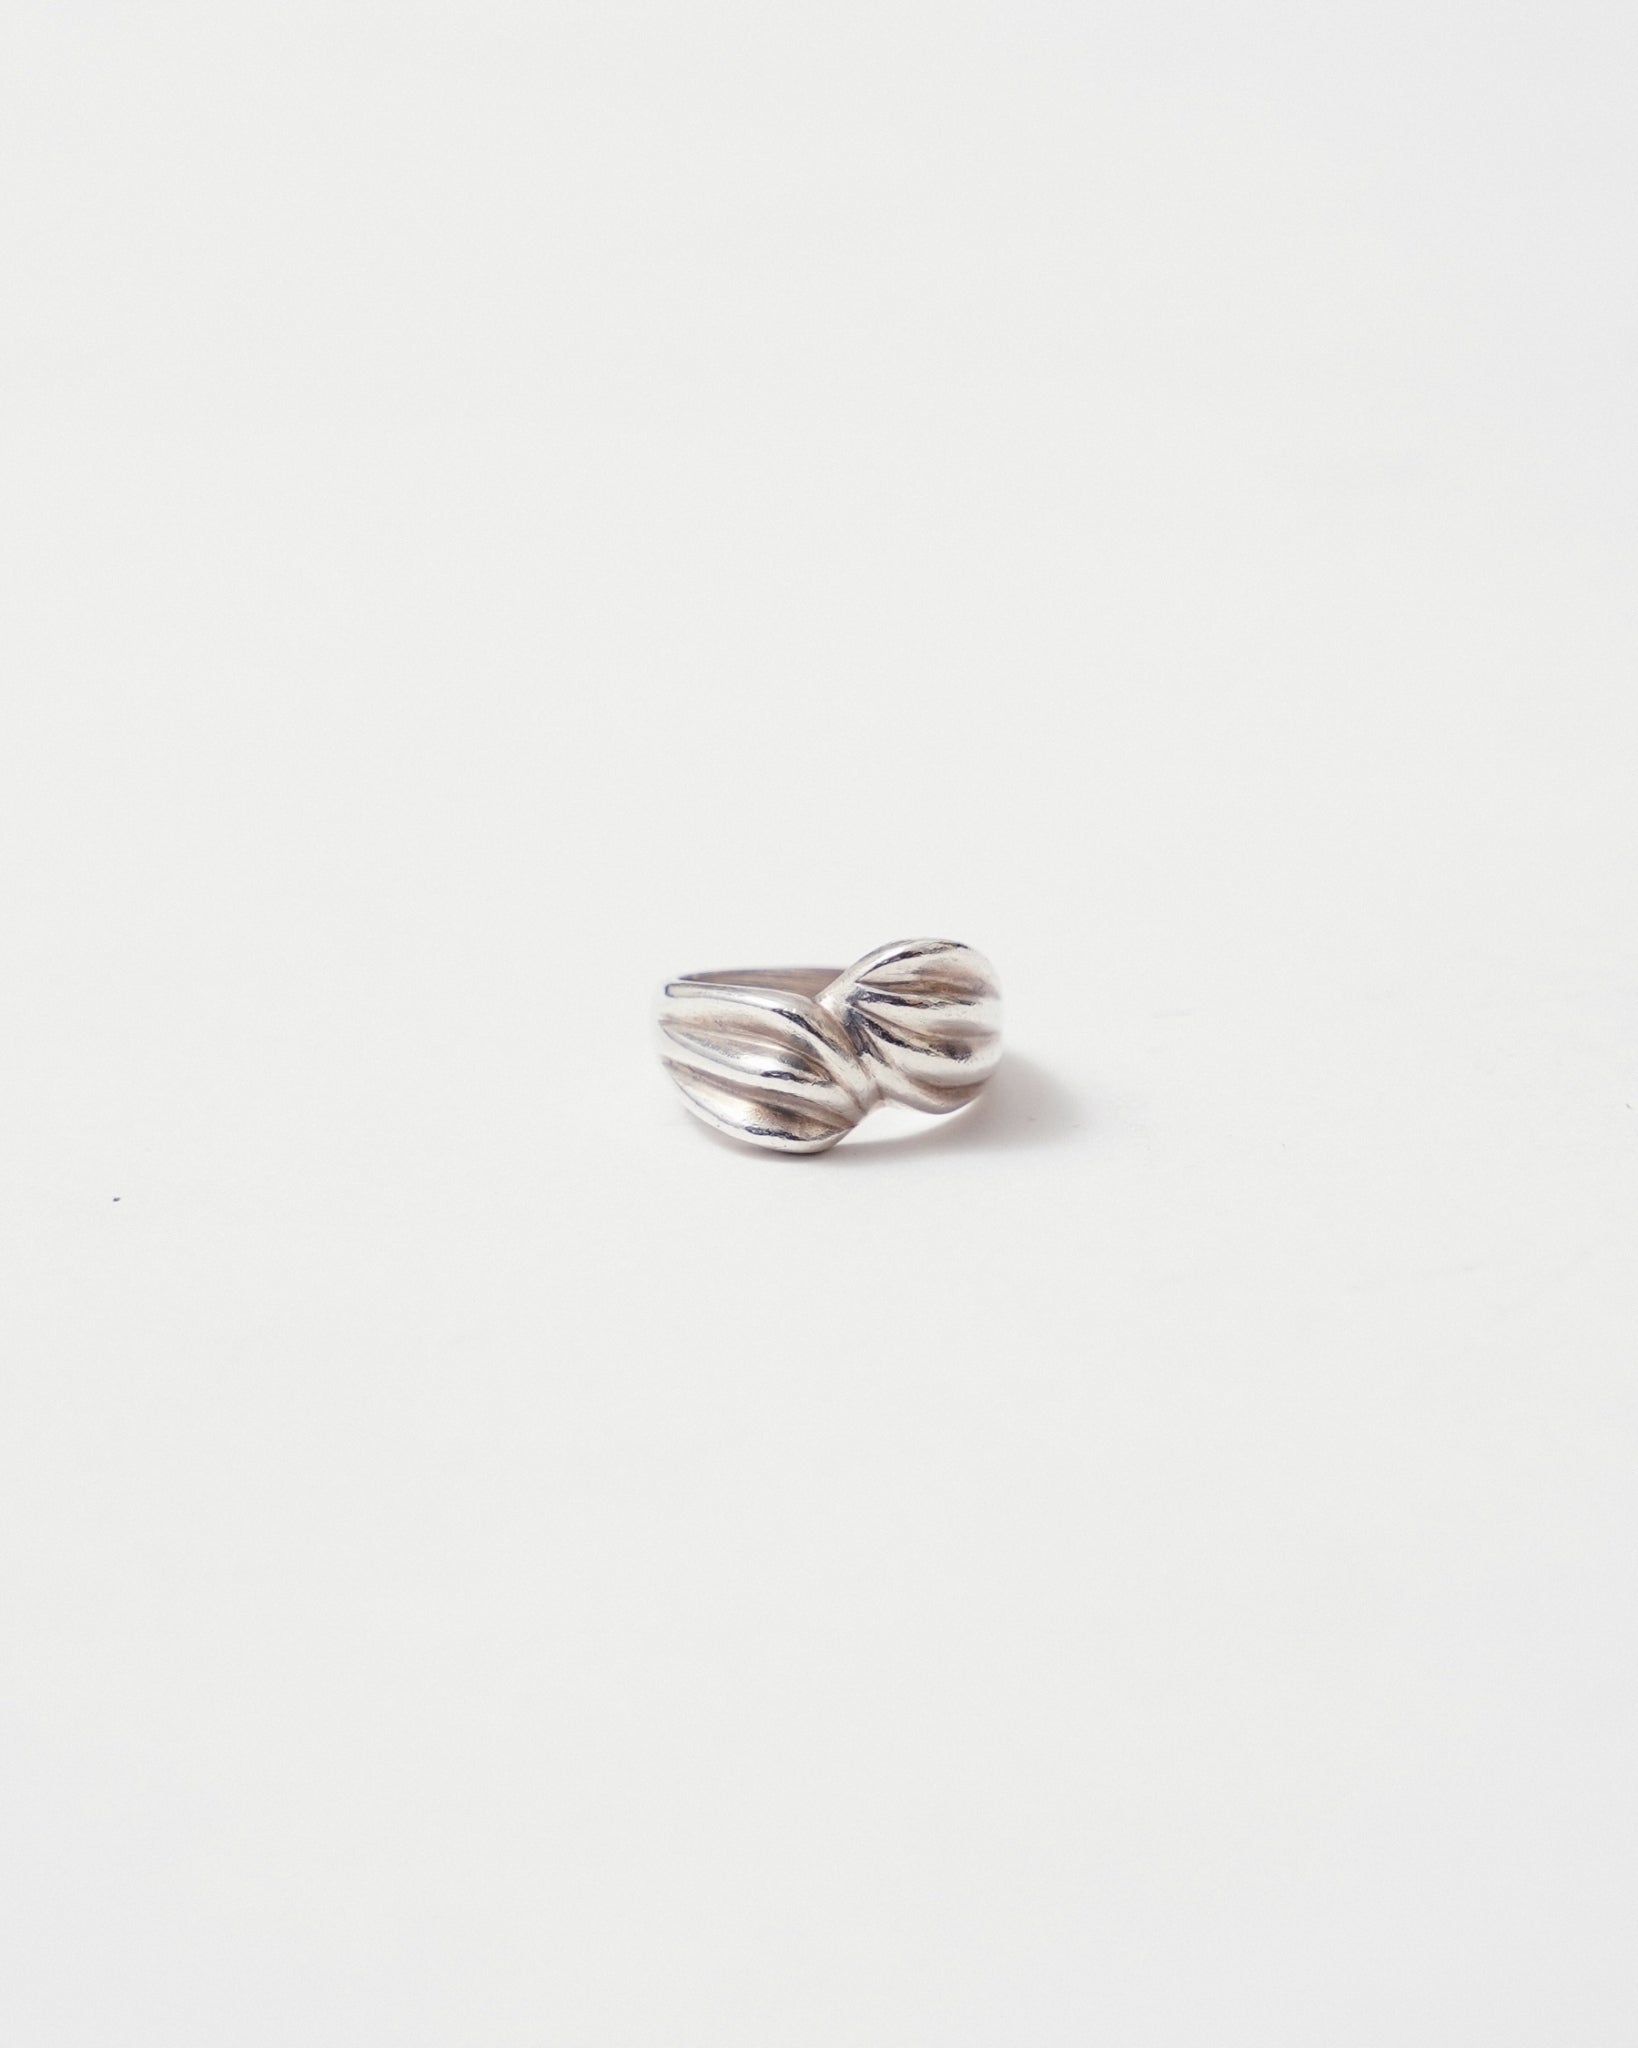 Silver Ring: size 15